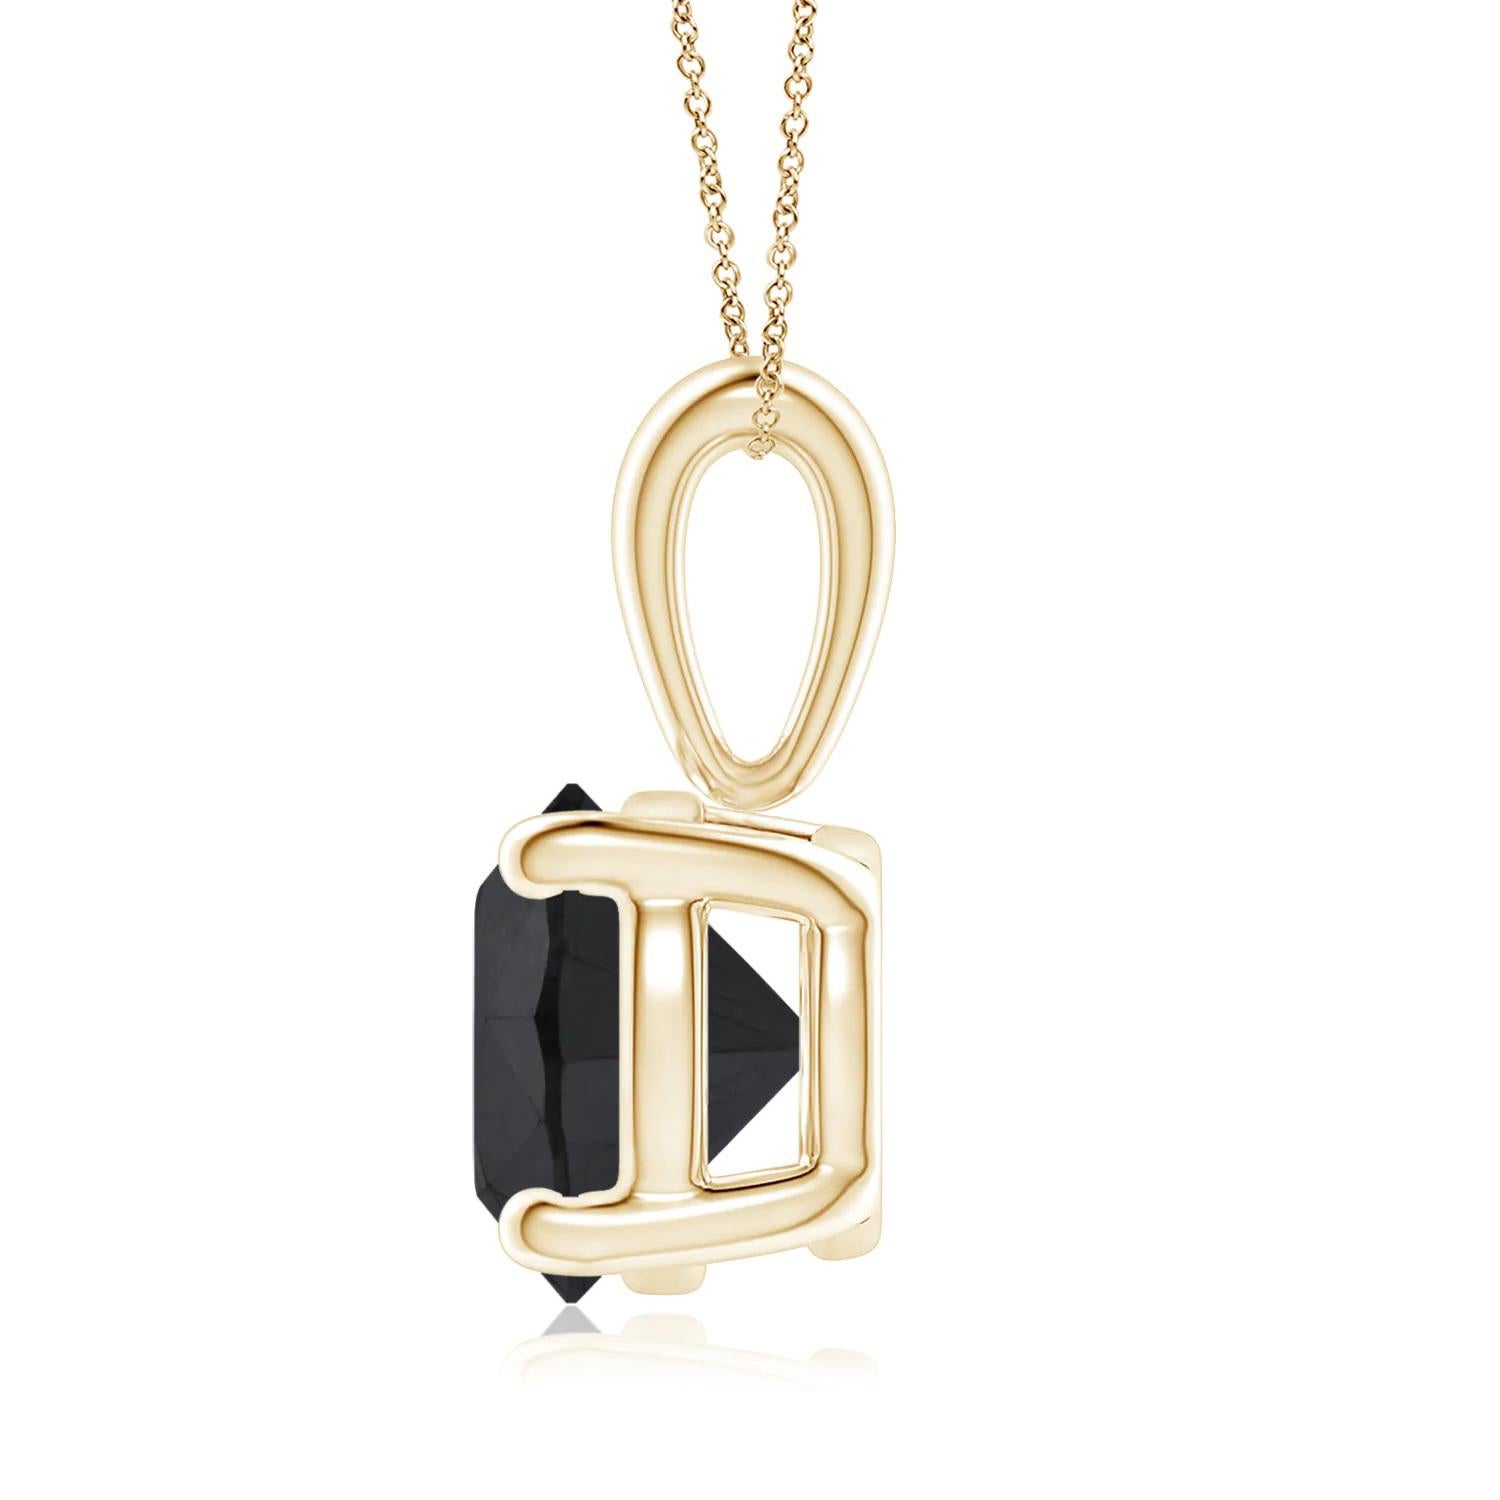 Surprise a special woman in your life with this breathtaking, statement hand crafted solitaire black diamond necklace. This eye-catching pendant necklace features a 1.55 carat round cut black diamond, measuring 6.73 x 6.79 x 4.52 mm set in 14k